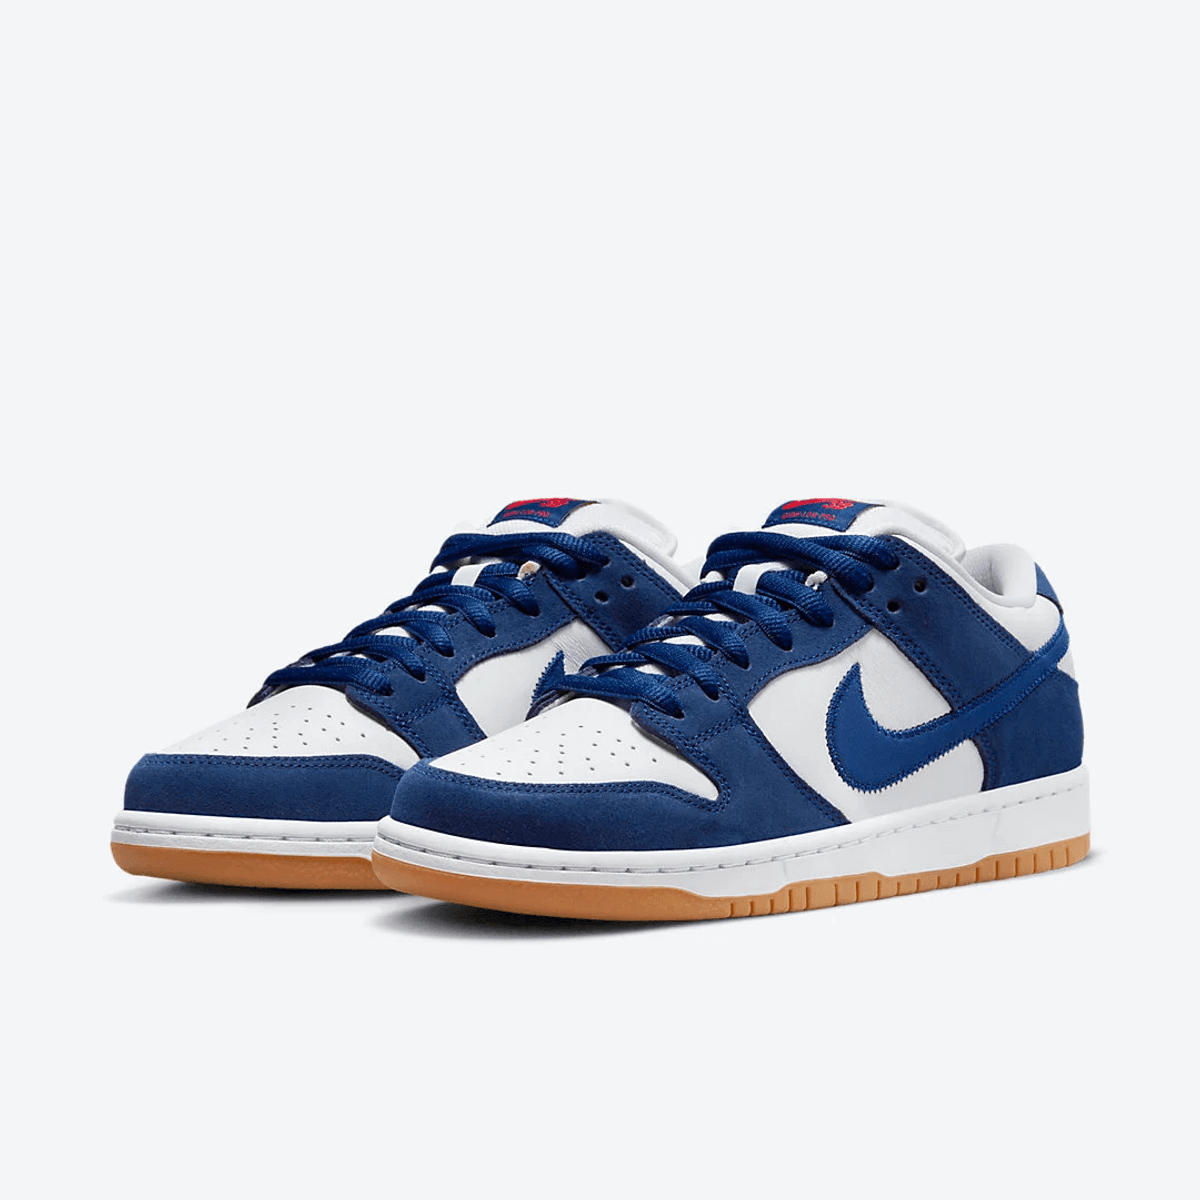 Nike Continues Its MLB Homage October 1st With The Nike SB Dunk Low LA Dodgers